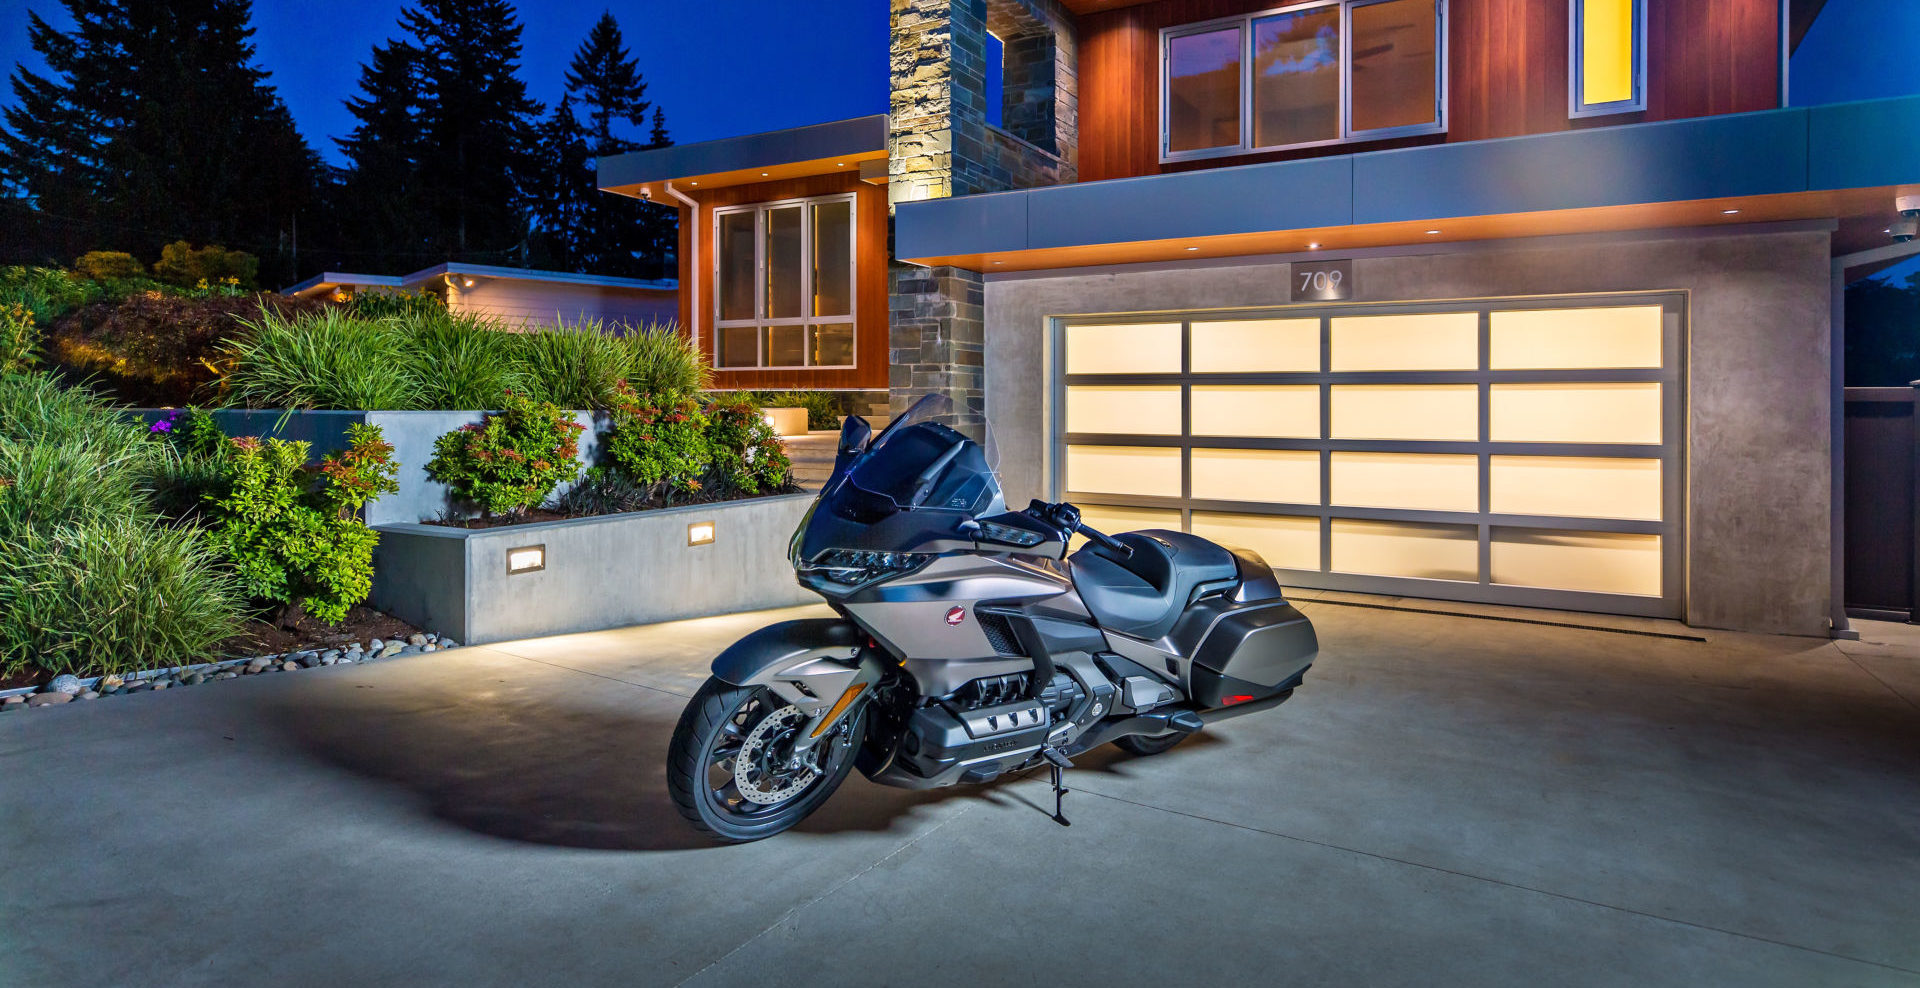 A Honda Gold Wing in front of a residence. Photo courtesy of American Honda.